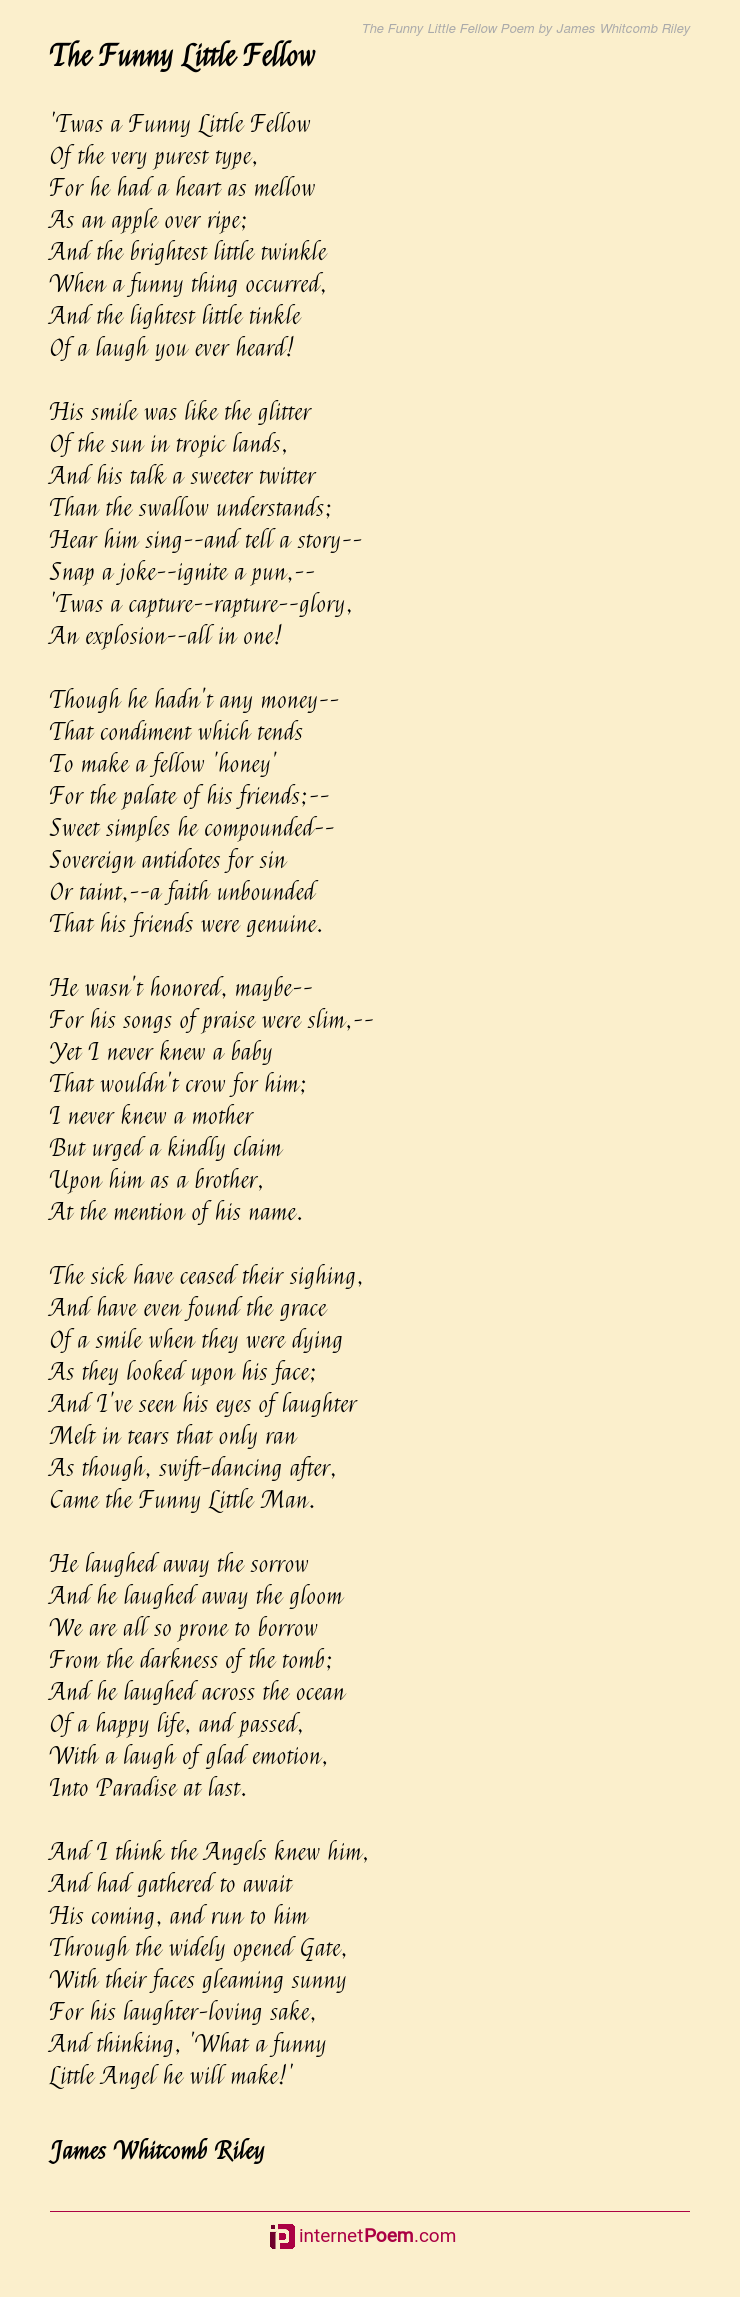 The Funny Little Fellow Poem by James Whitcomb Riley